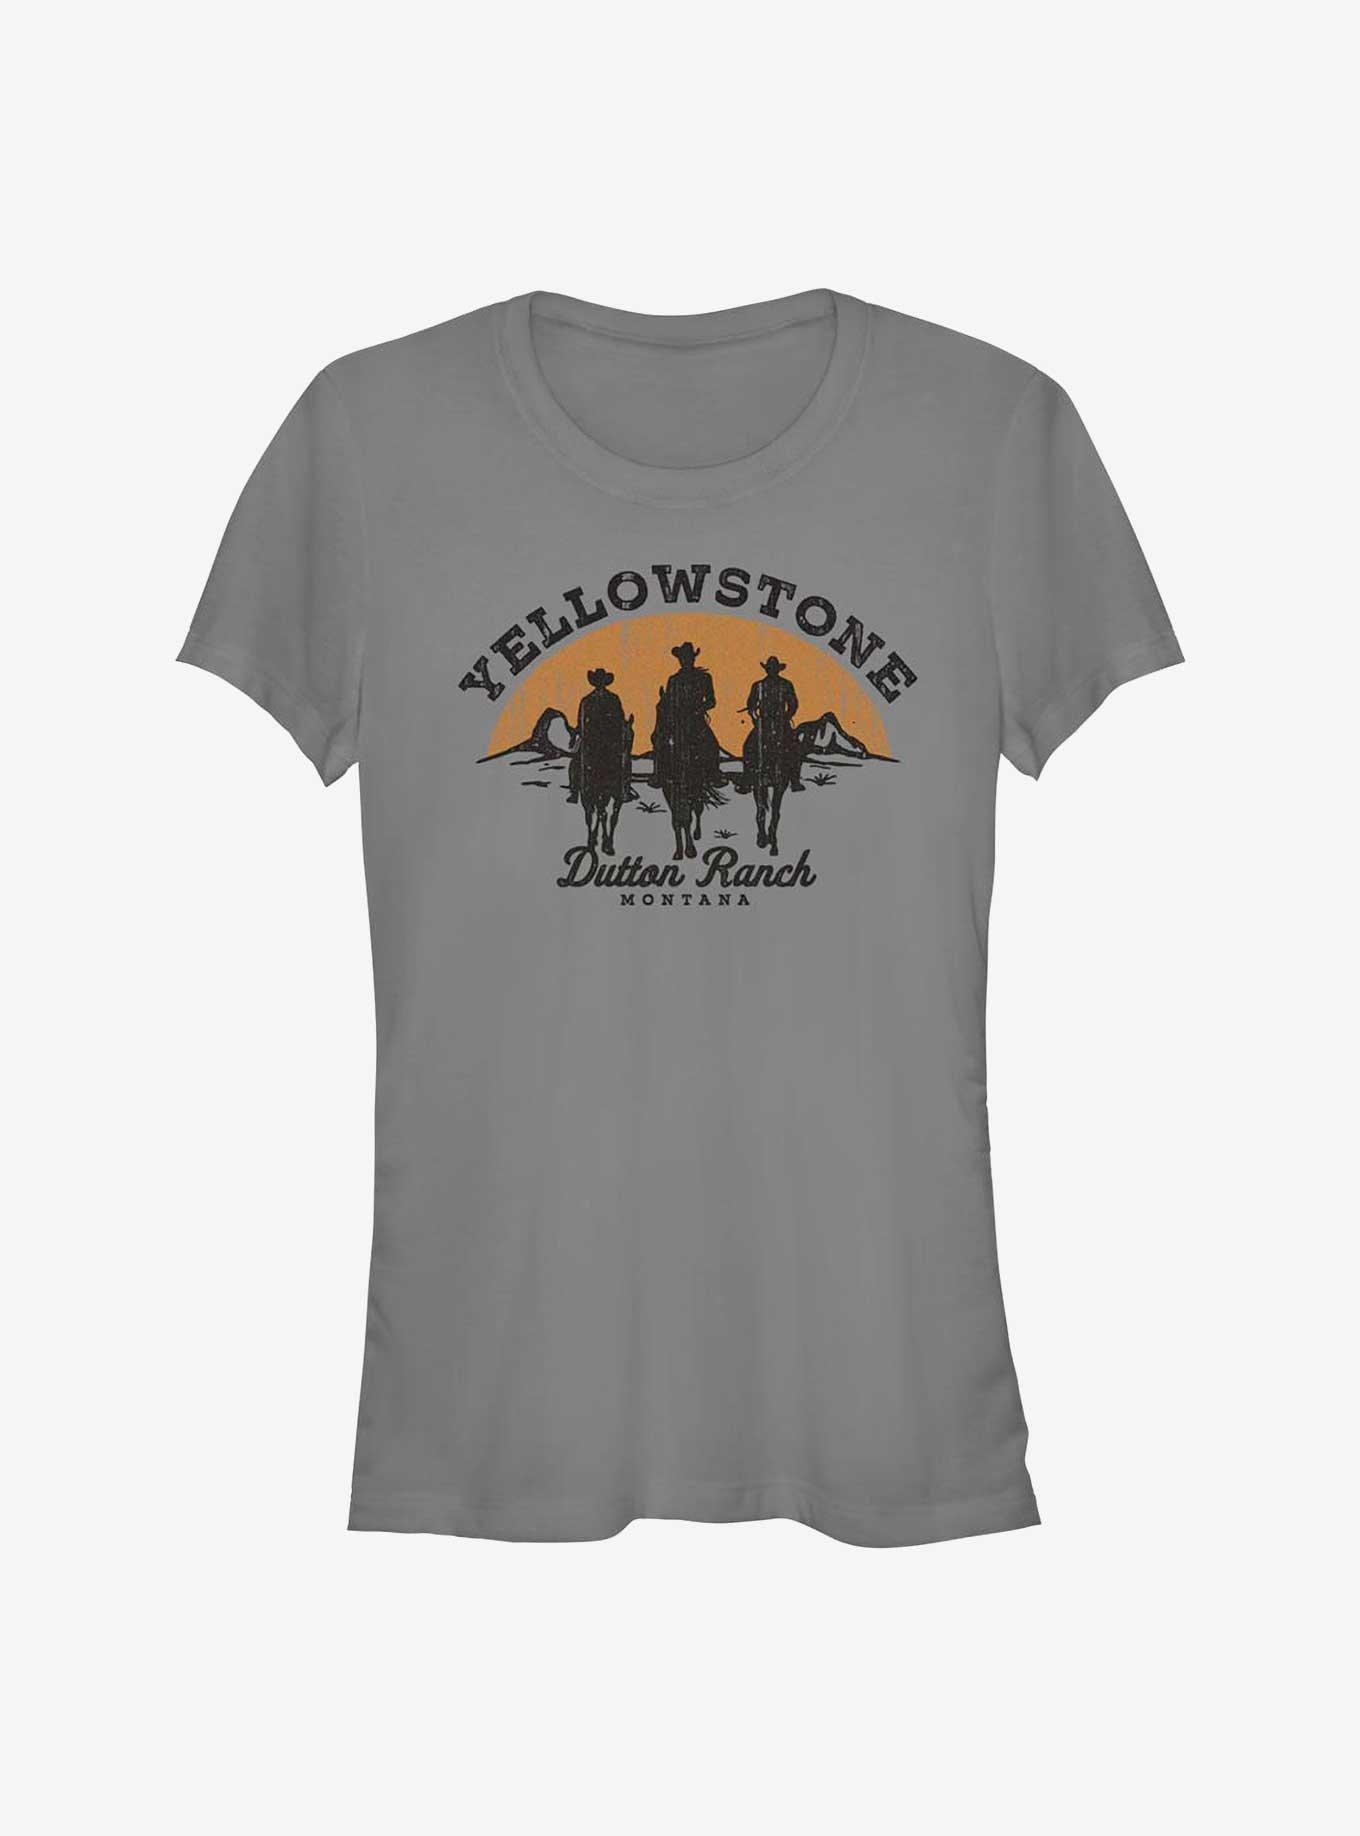 Yellowstone Riding Into The Sunset Girls T-Shirt, CHARCOAL, hi-res